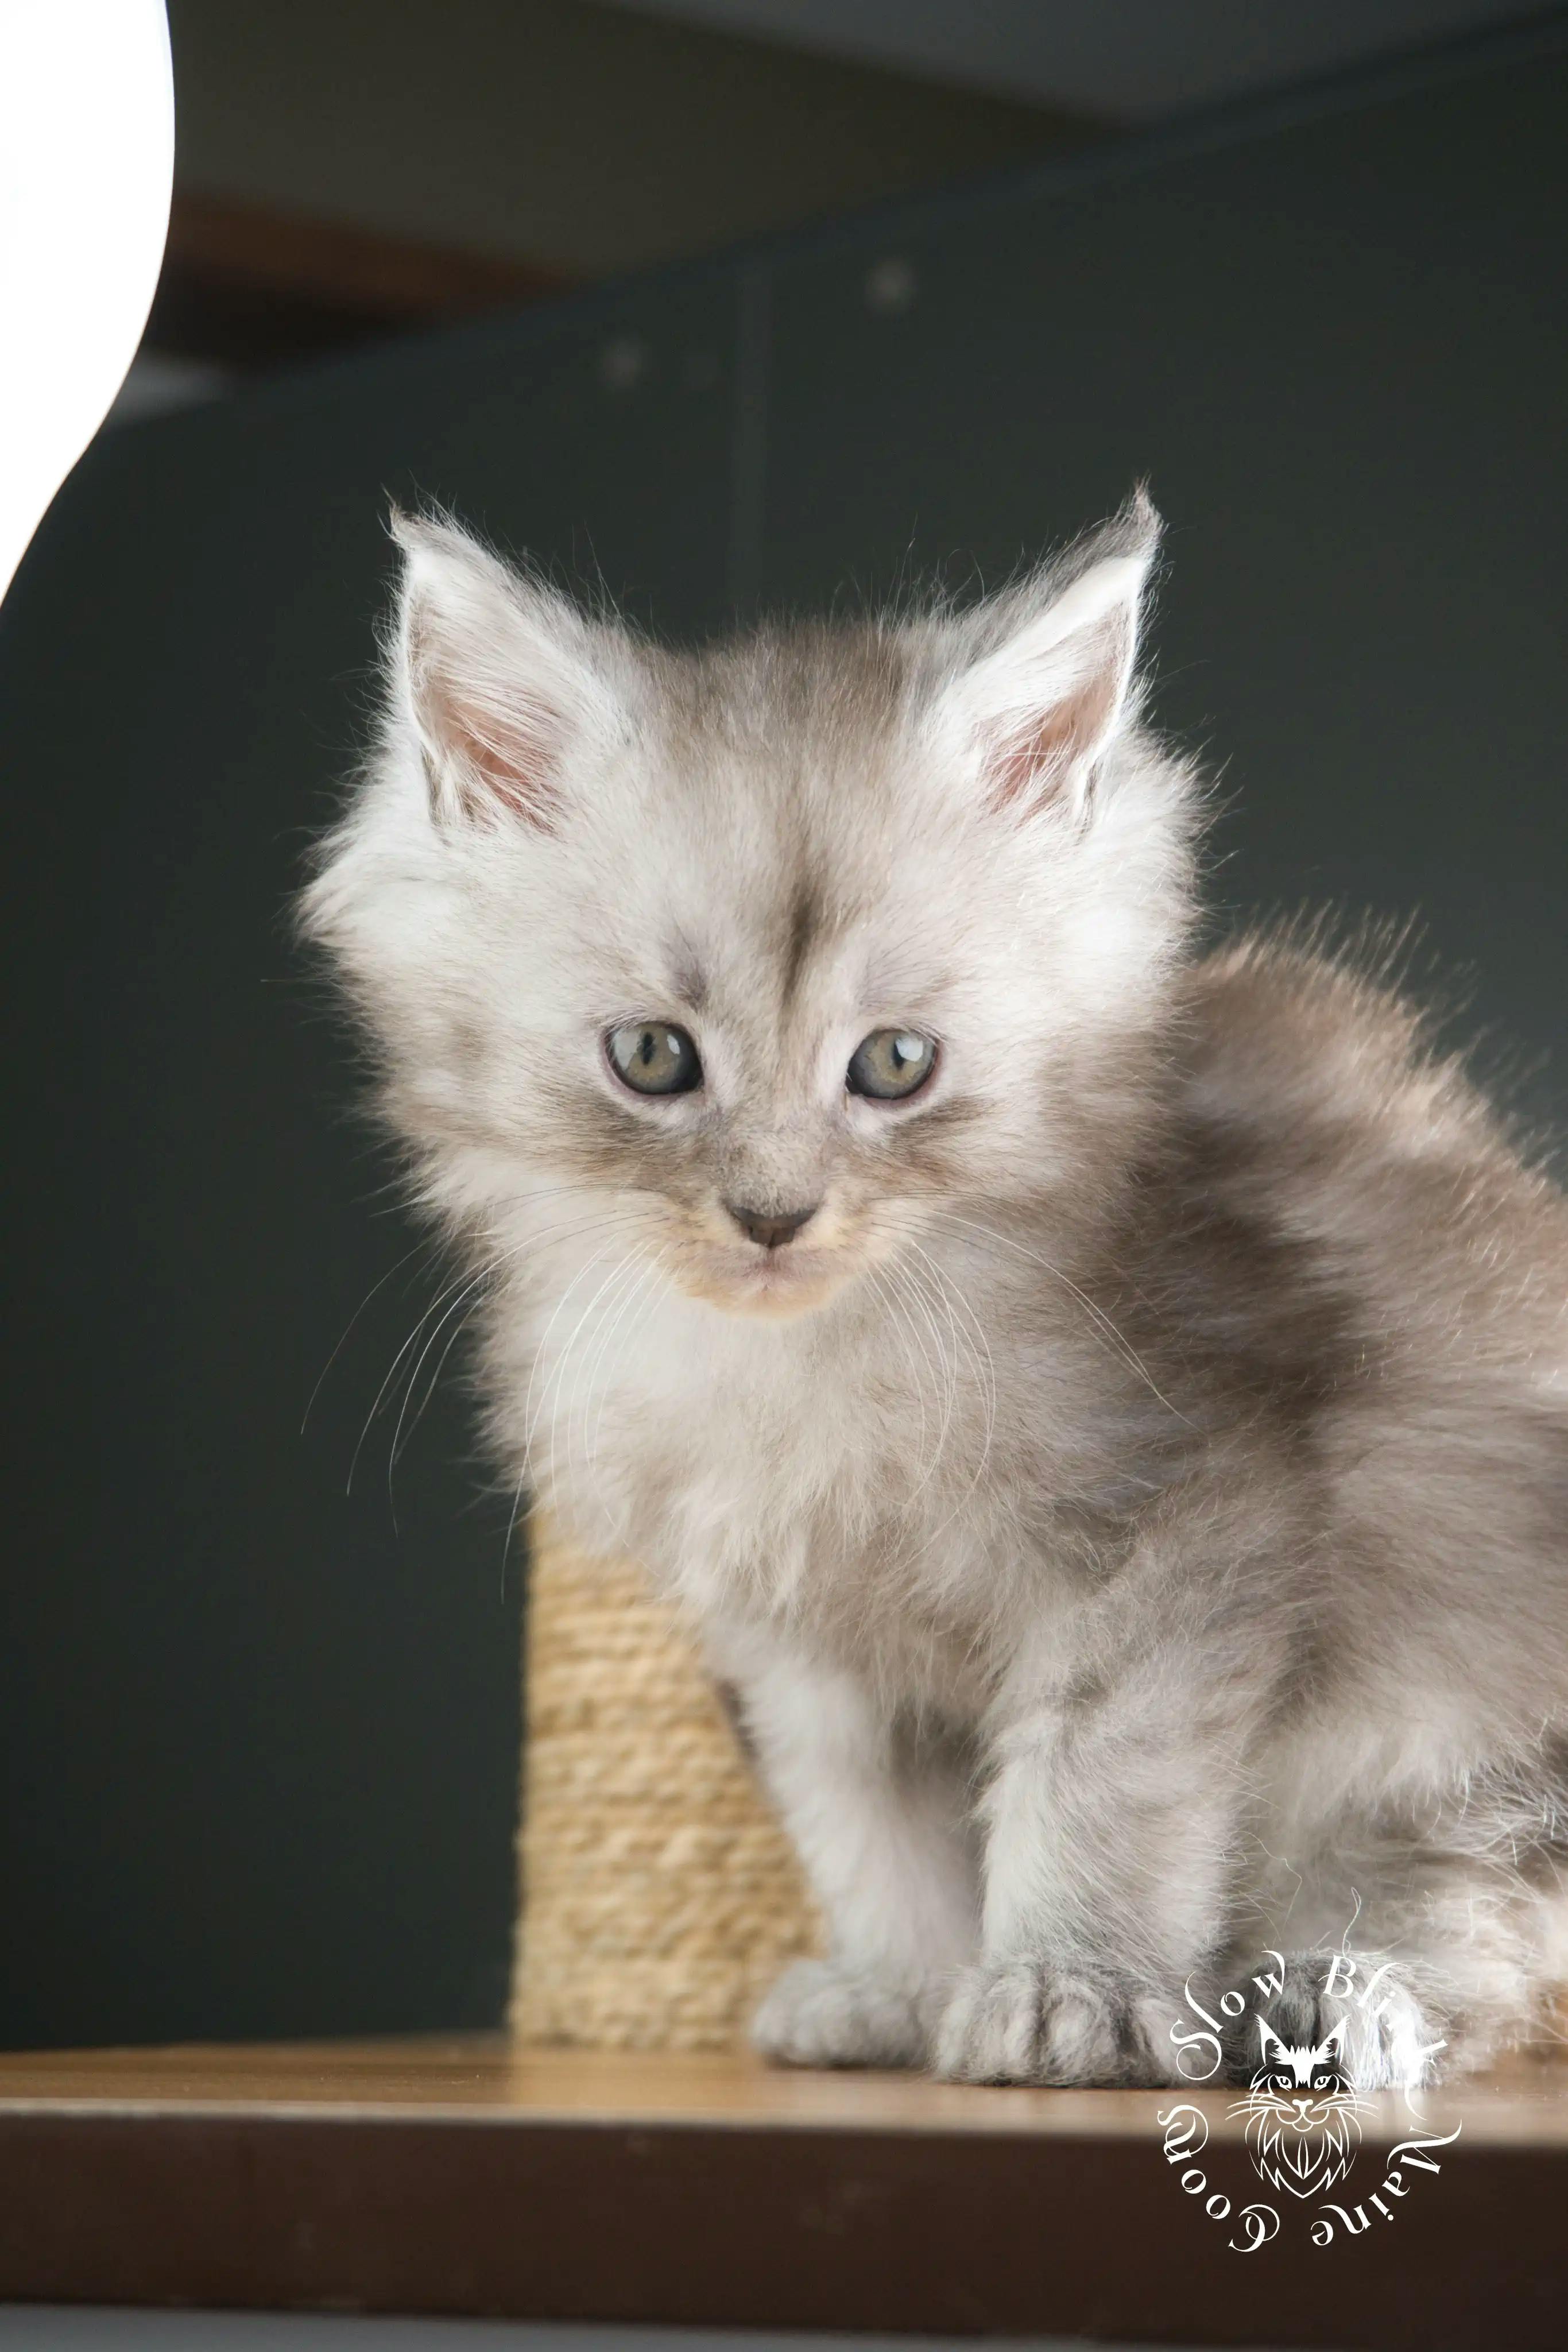 High Silver Maine Coon Kittens > black silver tabby maine coon kitten | ems code ns 22 23 24 25 | slowblinkmainecoons | 1004